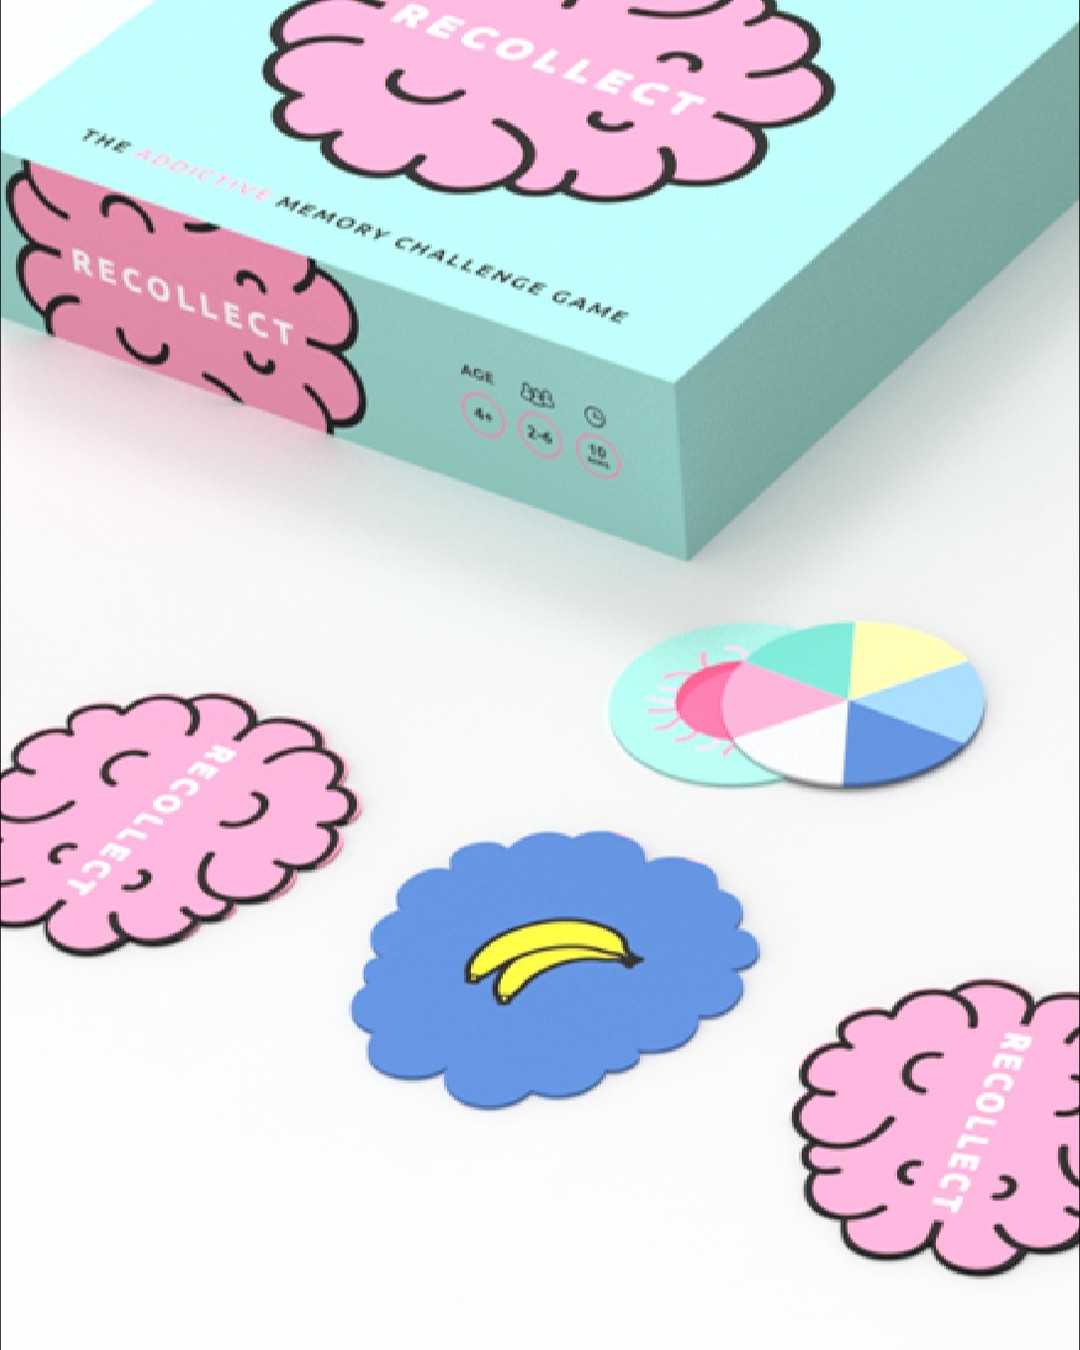 Recollect Game 🧠

Created with @pikkiidesign & @withcreative 

The brilliant memory challenge game that's fun for the whole family. 

With Recollect, you, your friends and family can put your memory skills to the test! 

Worked on:
∙ Game Cards
∙ Brochure 
∙ Packaging

#graphicdesign #boardgamedesign #gamecards #cardgame #memorygame #packagingdesign #visualidentity⁠ #recollect #brandpad_io #aigaeyeondesign #itsnicethat #gustedesign